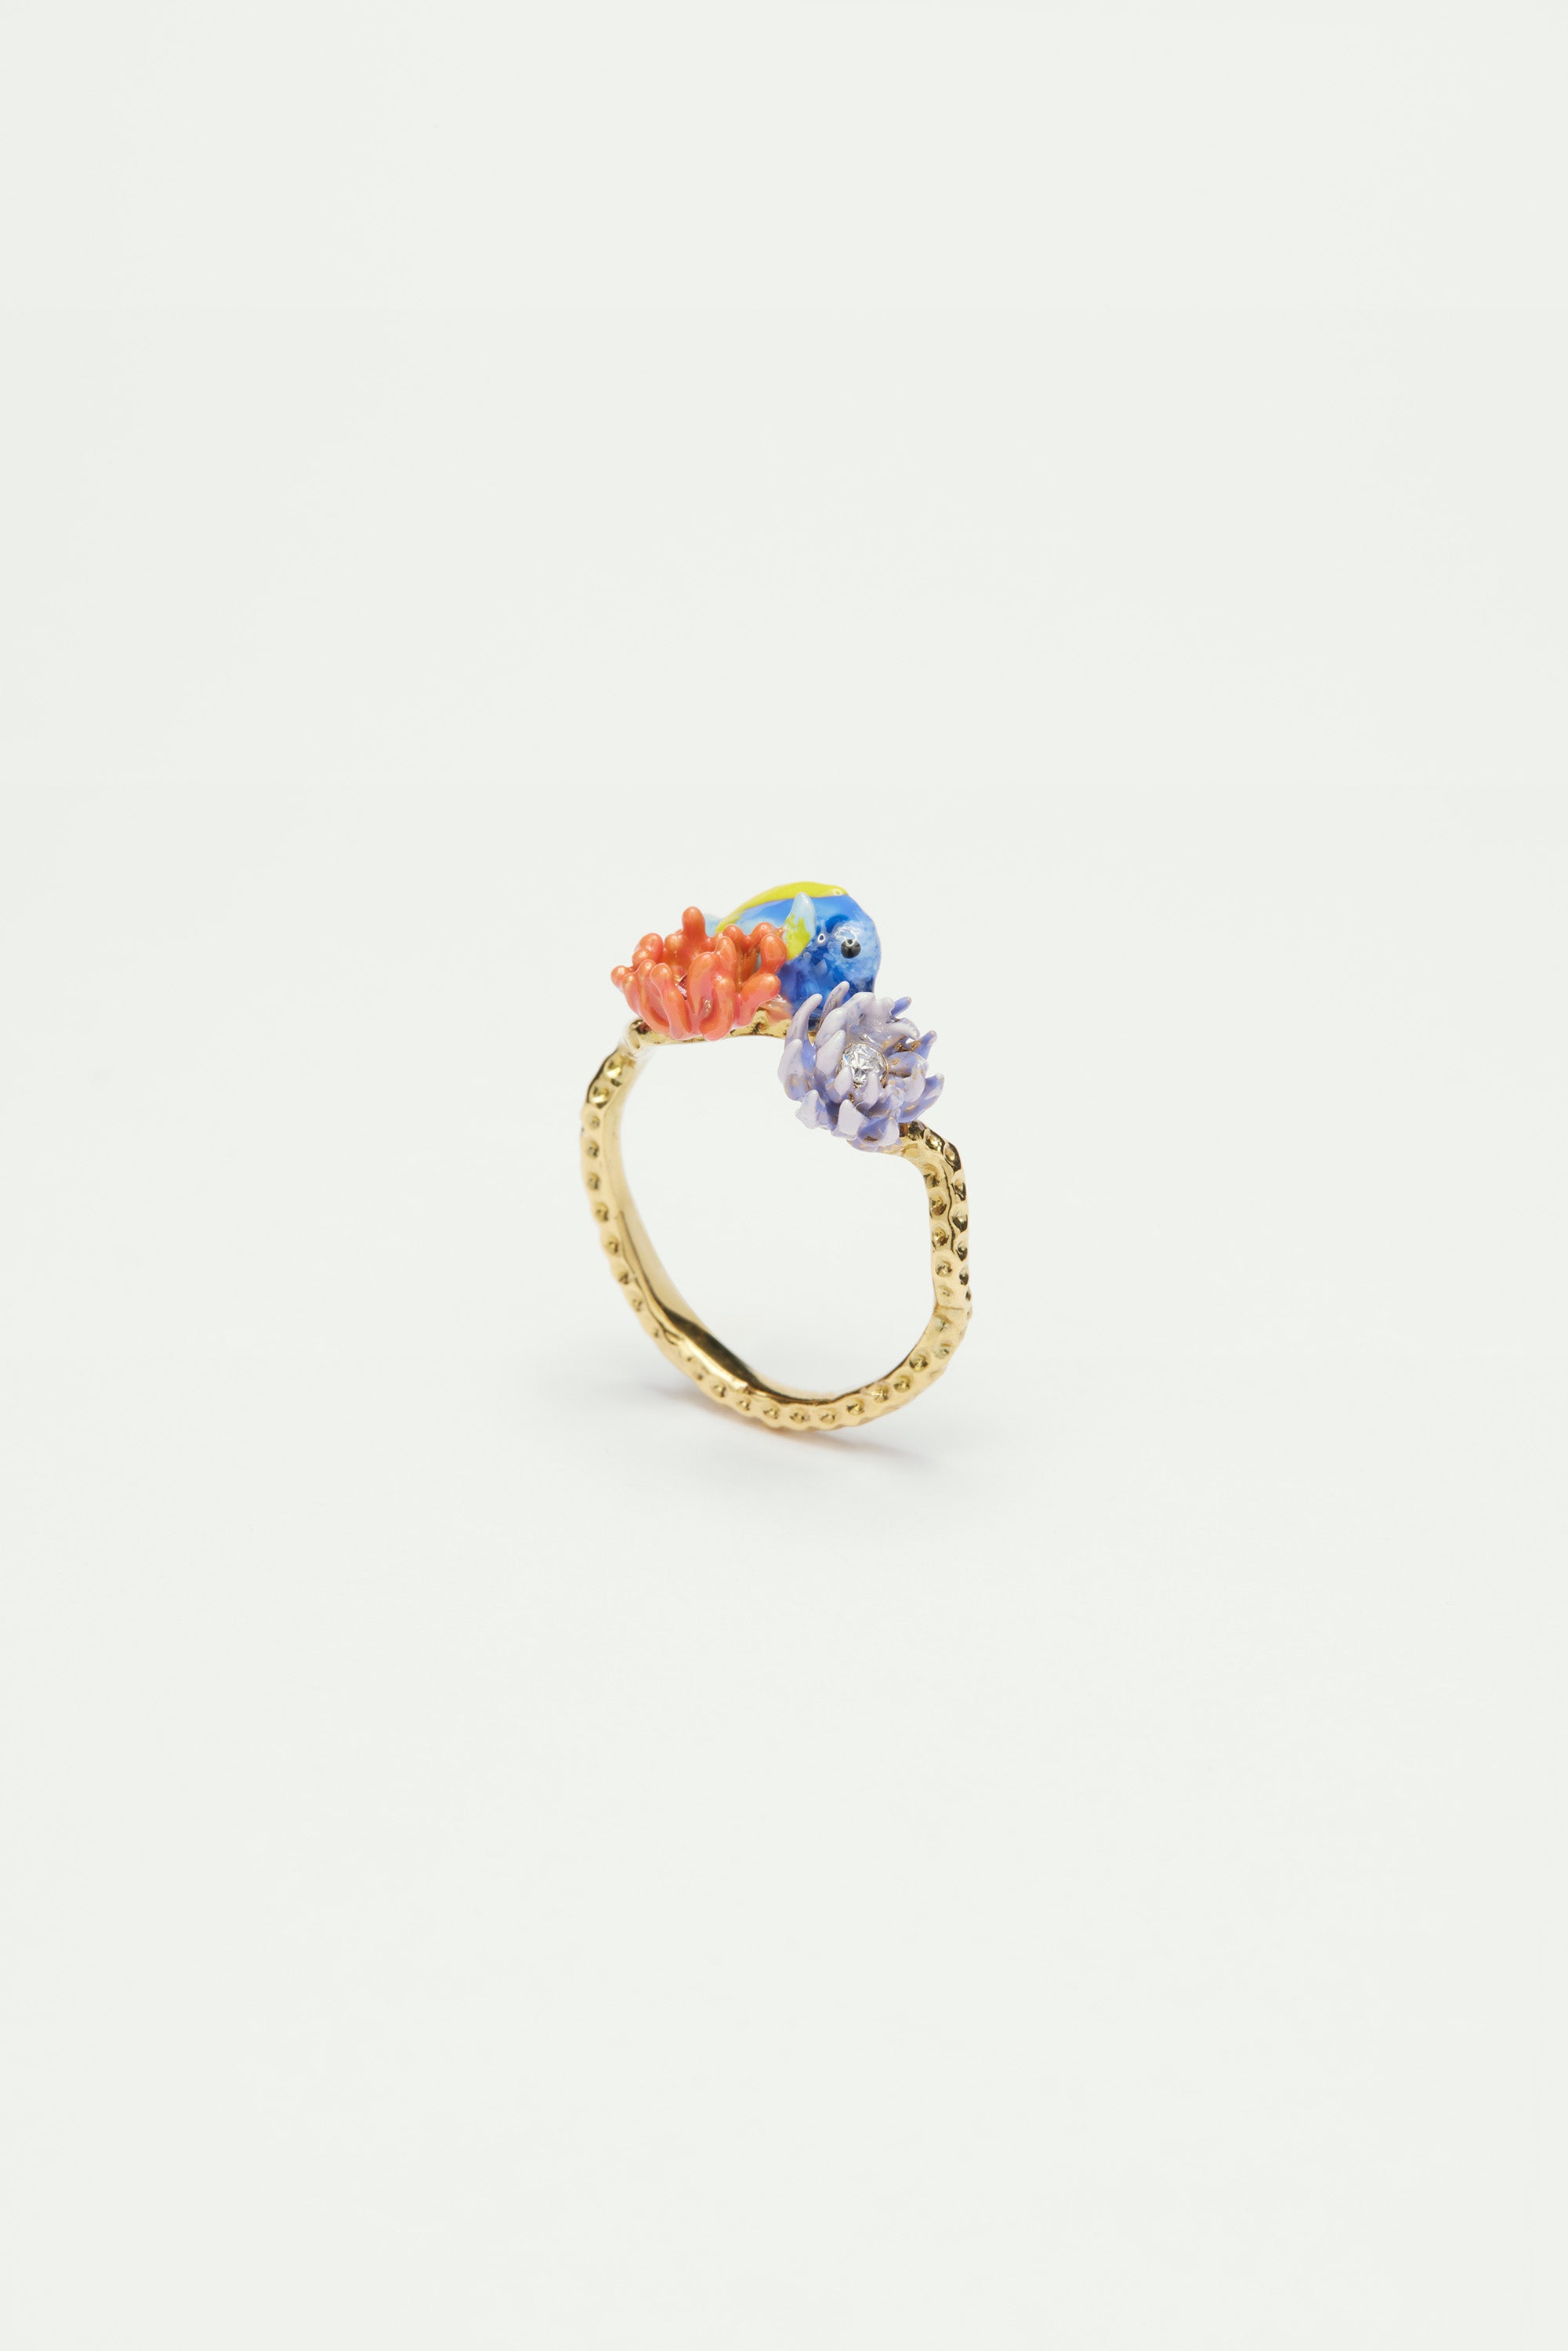 Blue fish, pink anemone and sea urchin adjustable ring